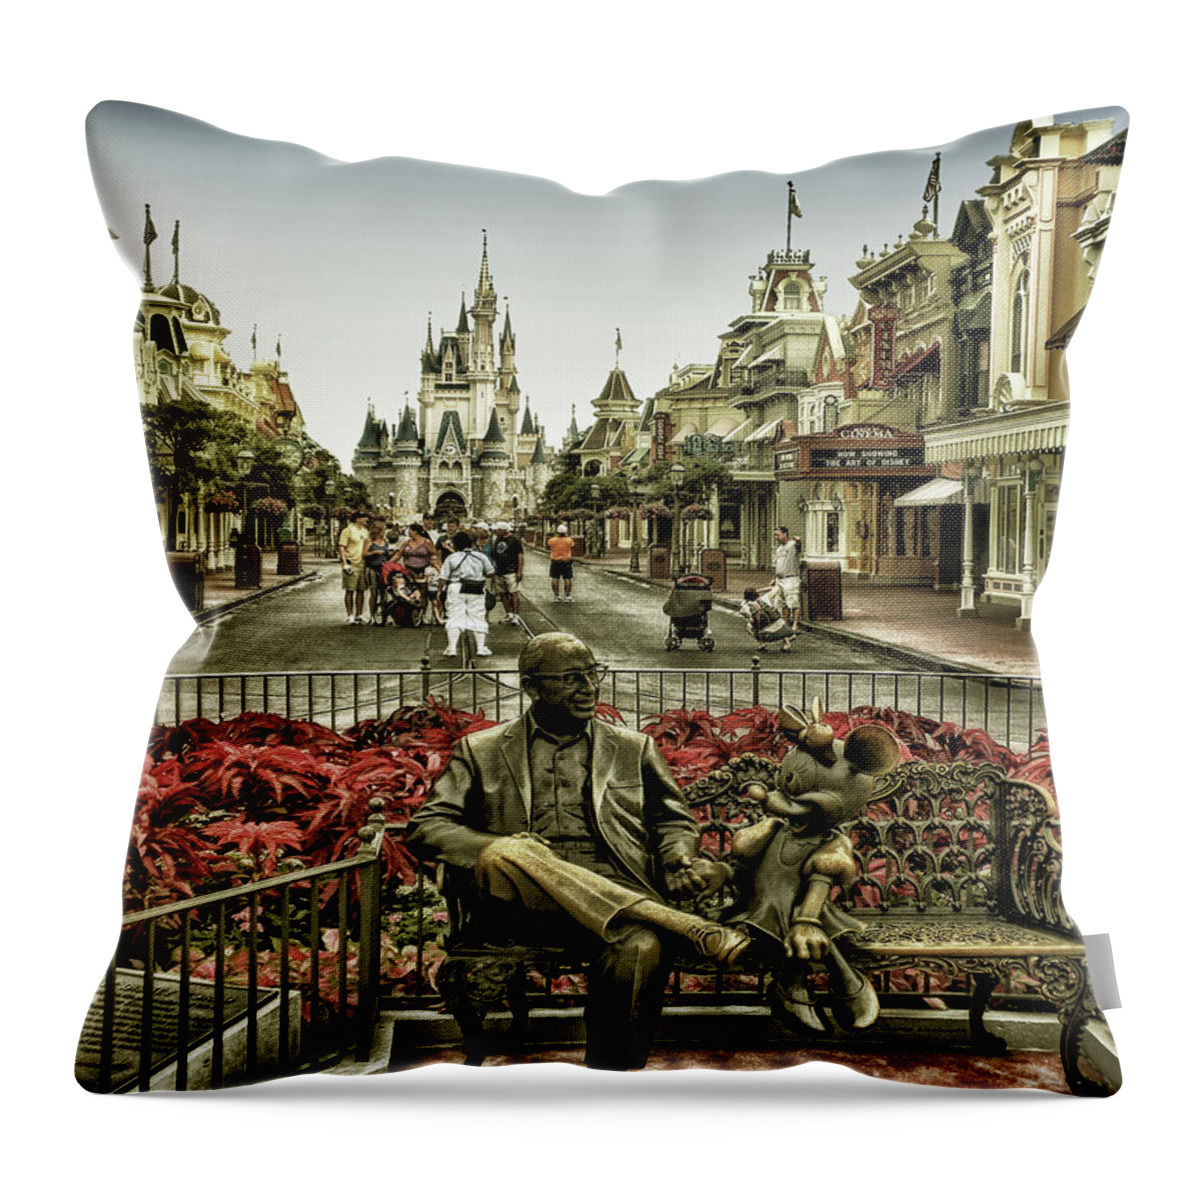 Magic Kingdom Throw Pillow featuring the photograph Roy And Minnie Mouse Antique Style Walt Disney World MP by Thomas Woolworth